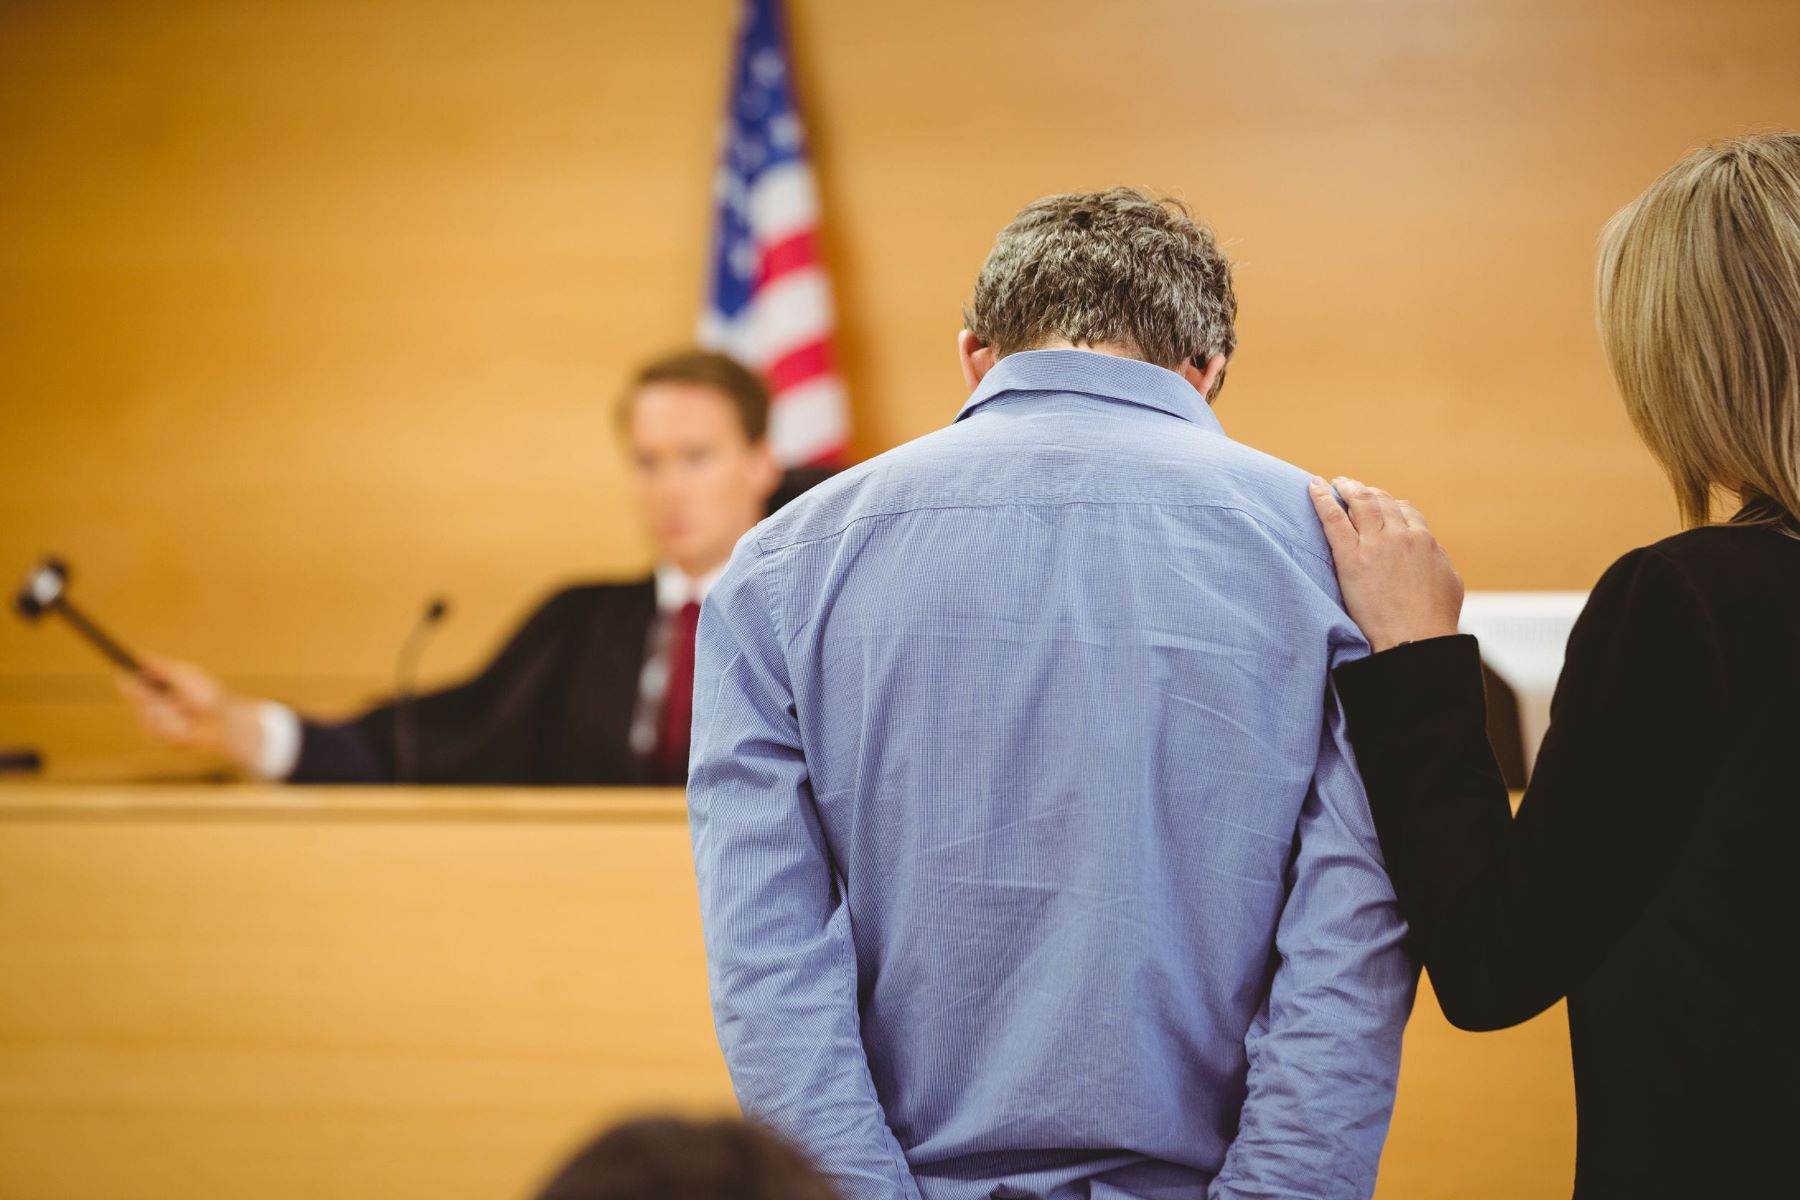 How To Get A Restitution Charge Dismissed With Ineffective Counsel